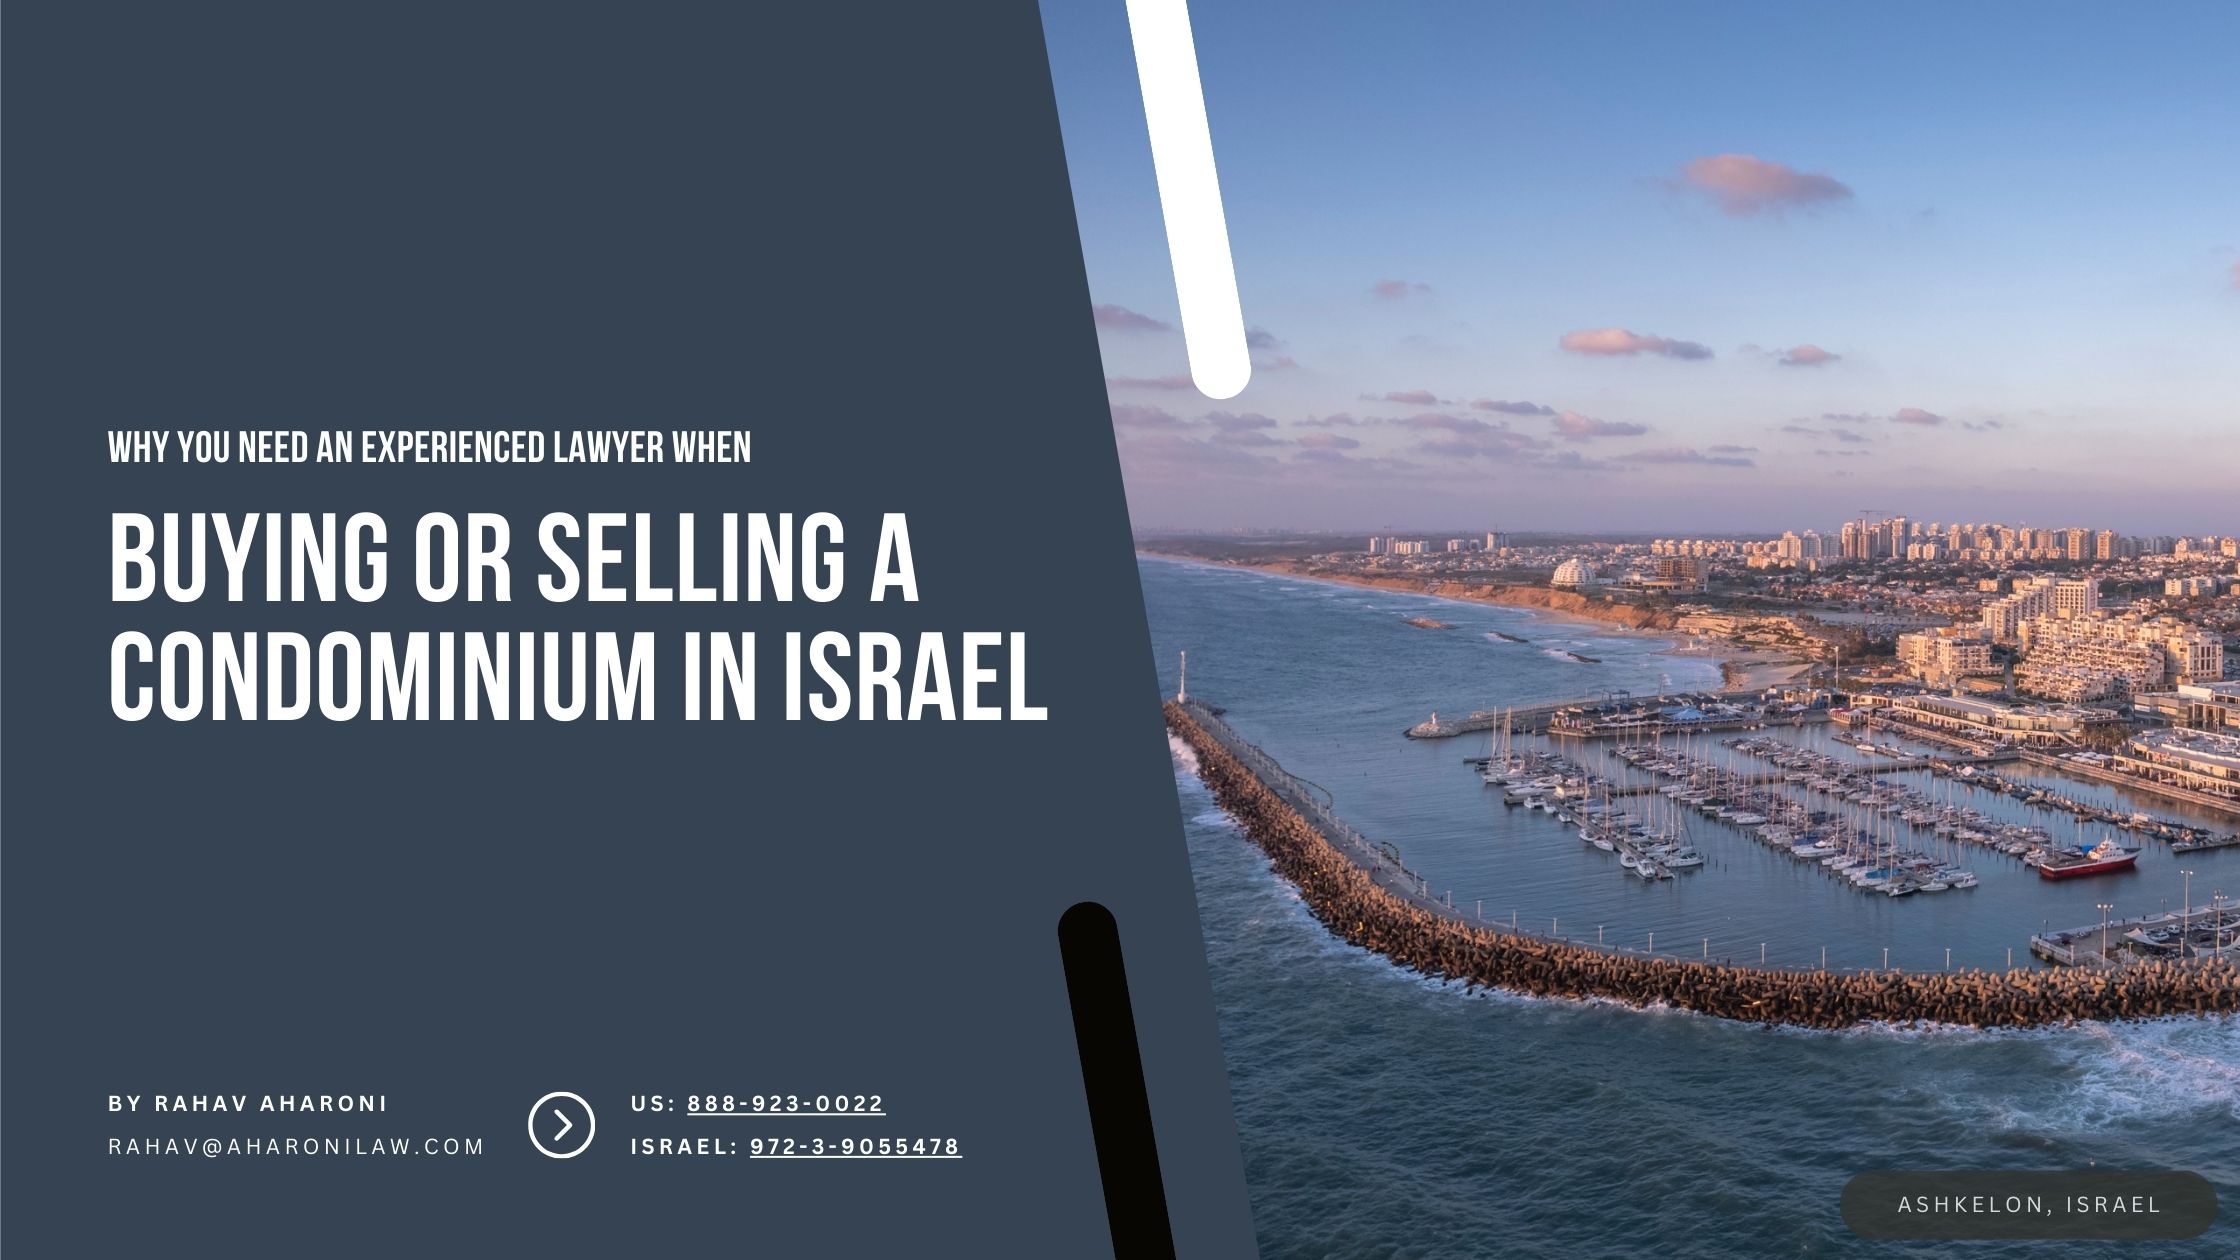 Why You Need an Experienced Lawyer with a Proven Track Record When Buying or Selling a Condominium in Israel